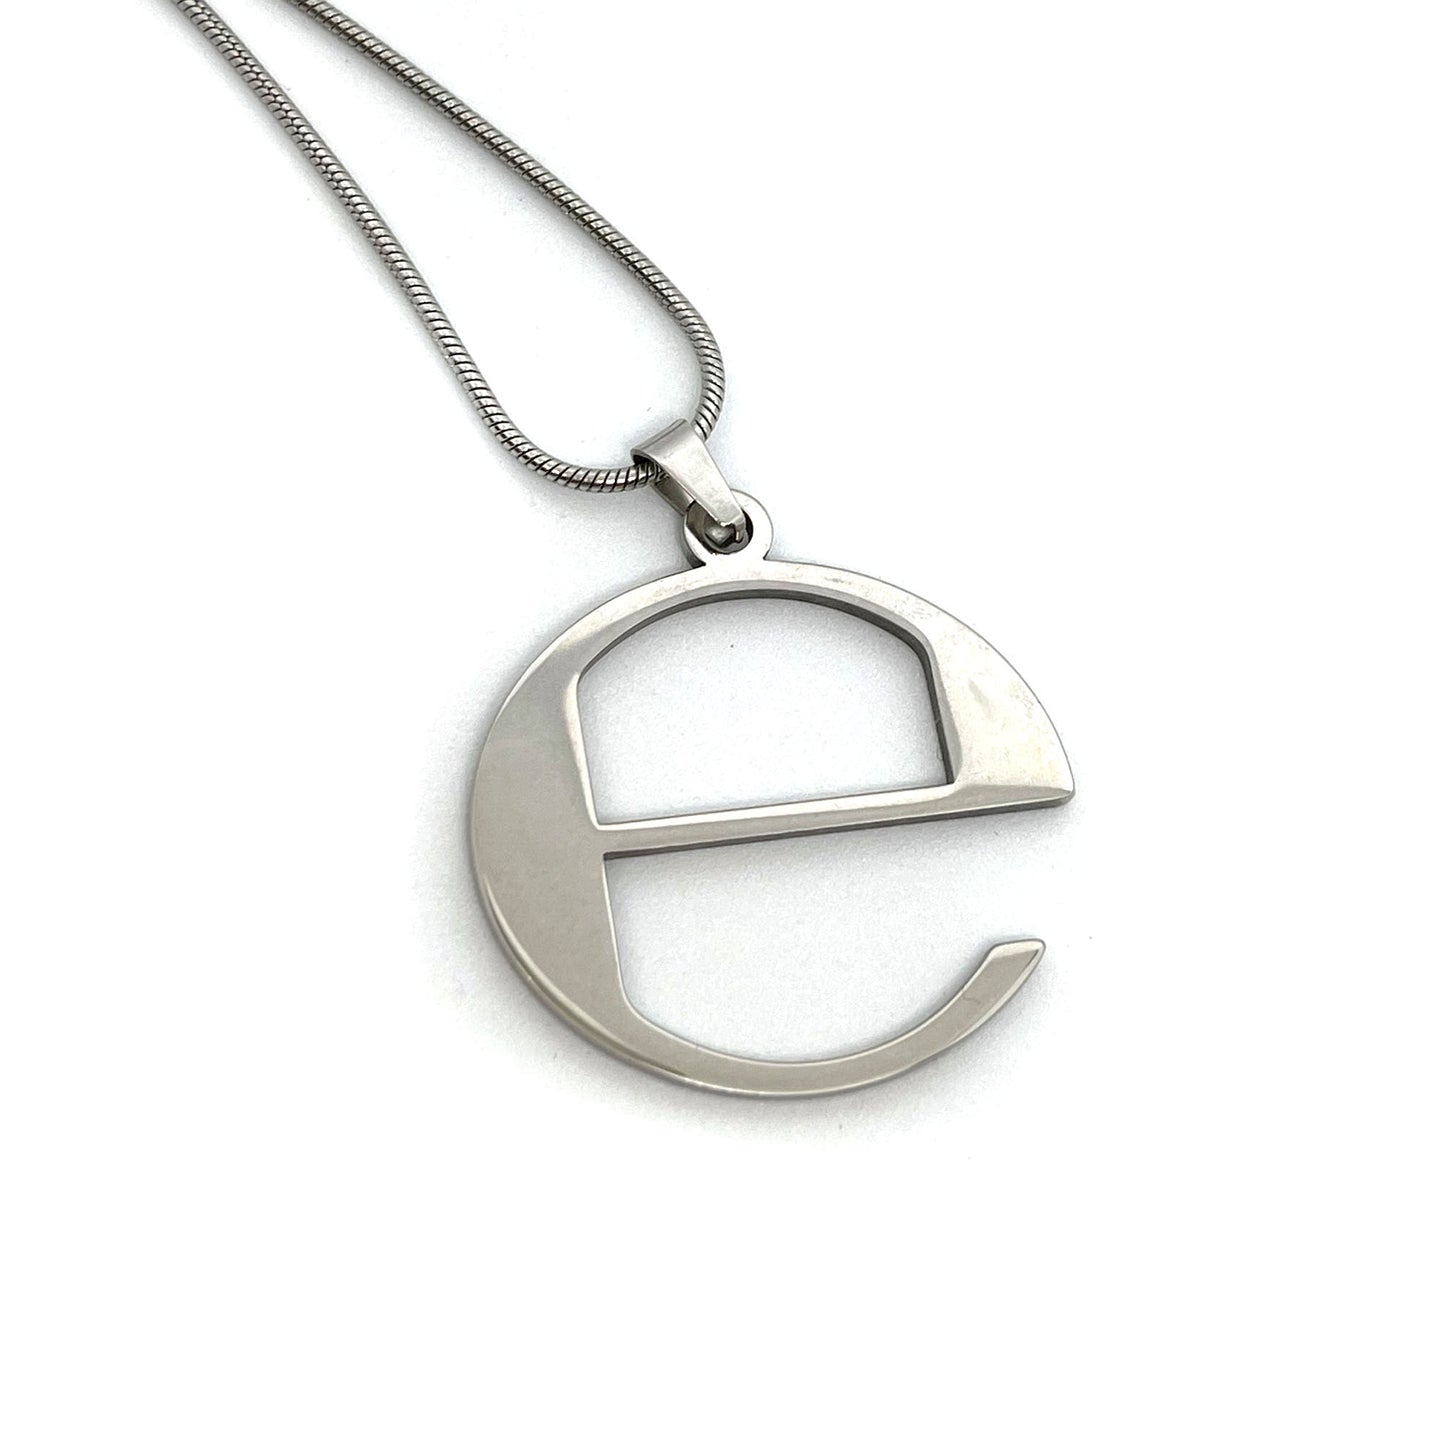 Ecco2k "E" Album Fan-Made Stainless Steel Pendant Chain Necklace – 60cm Stainless Steel Chain